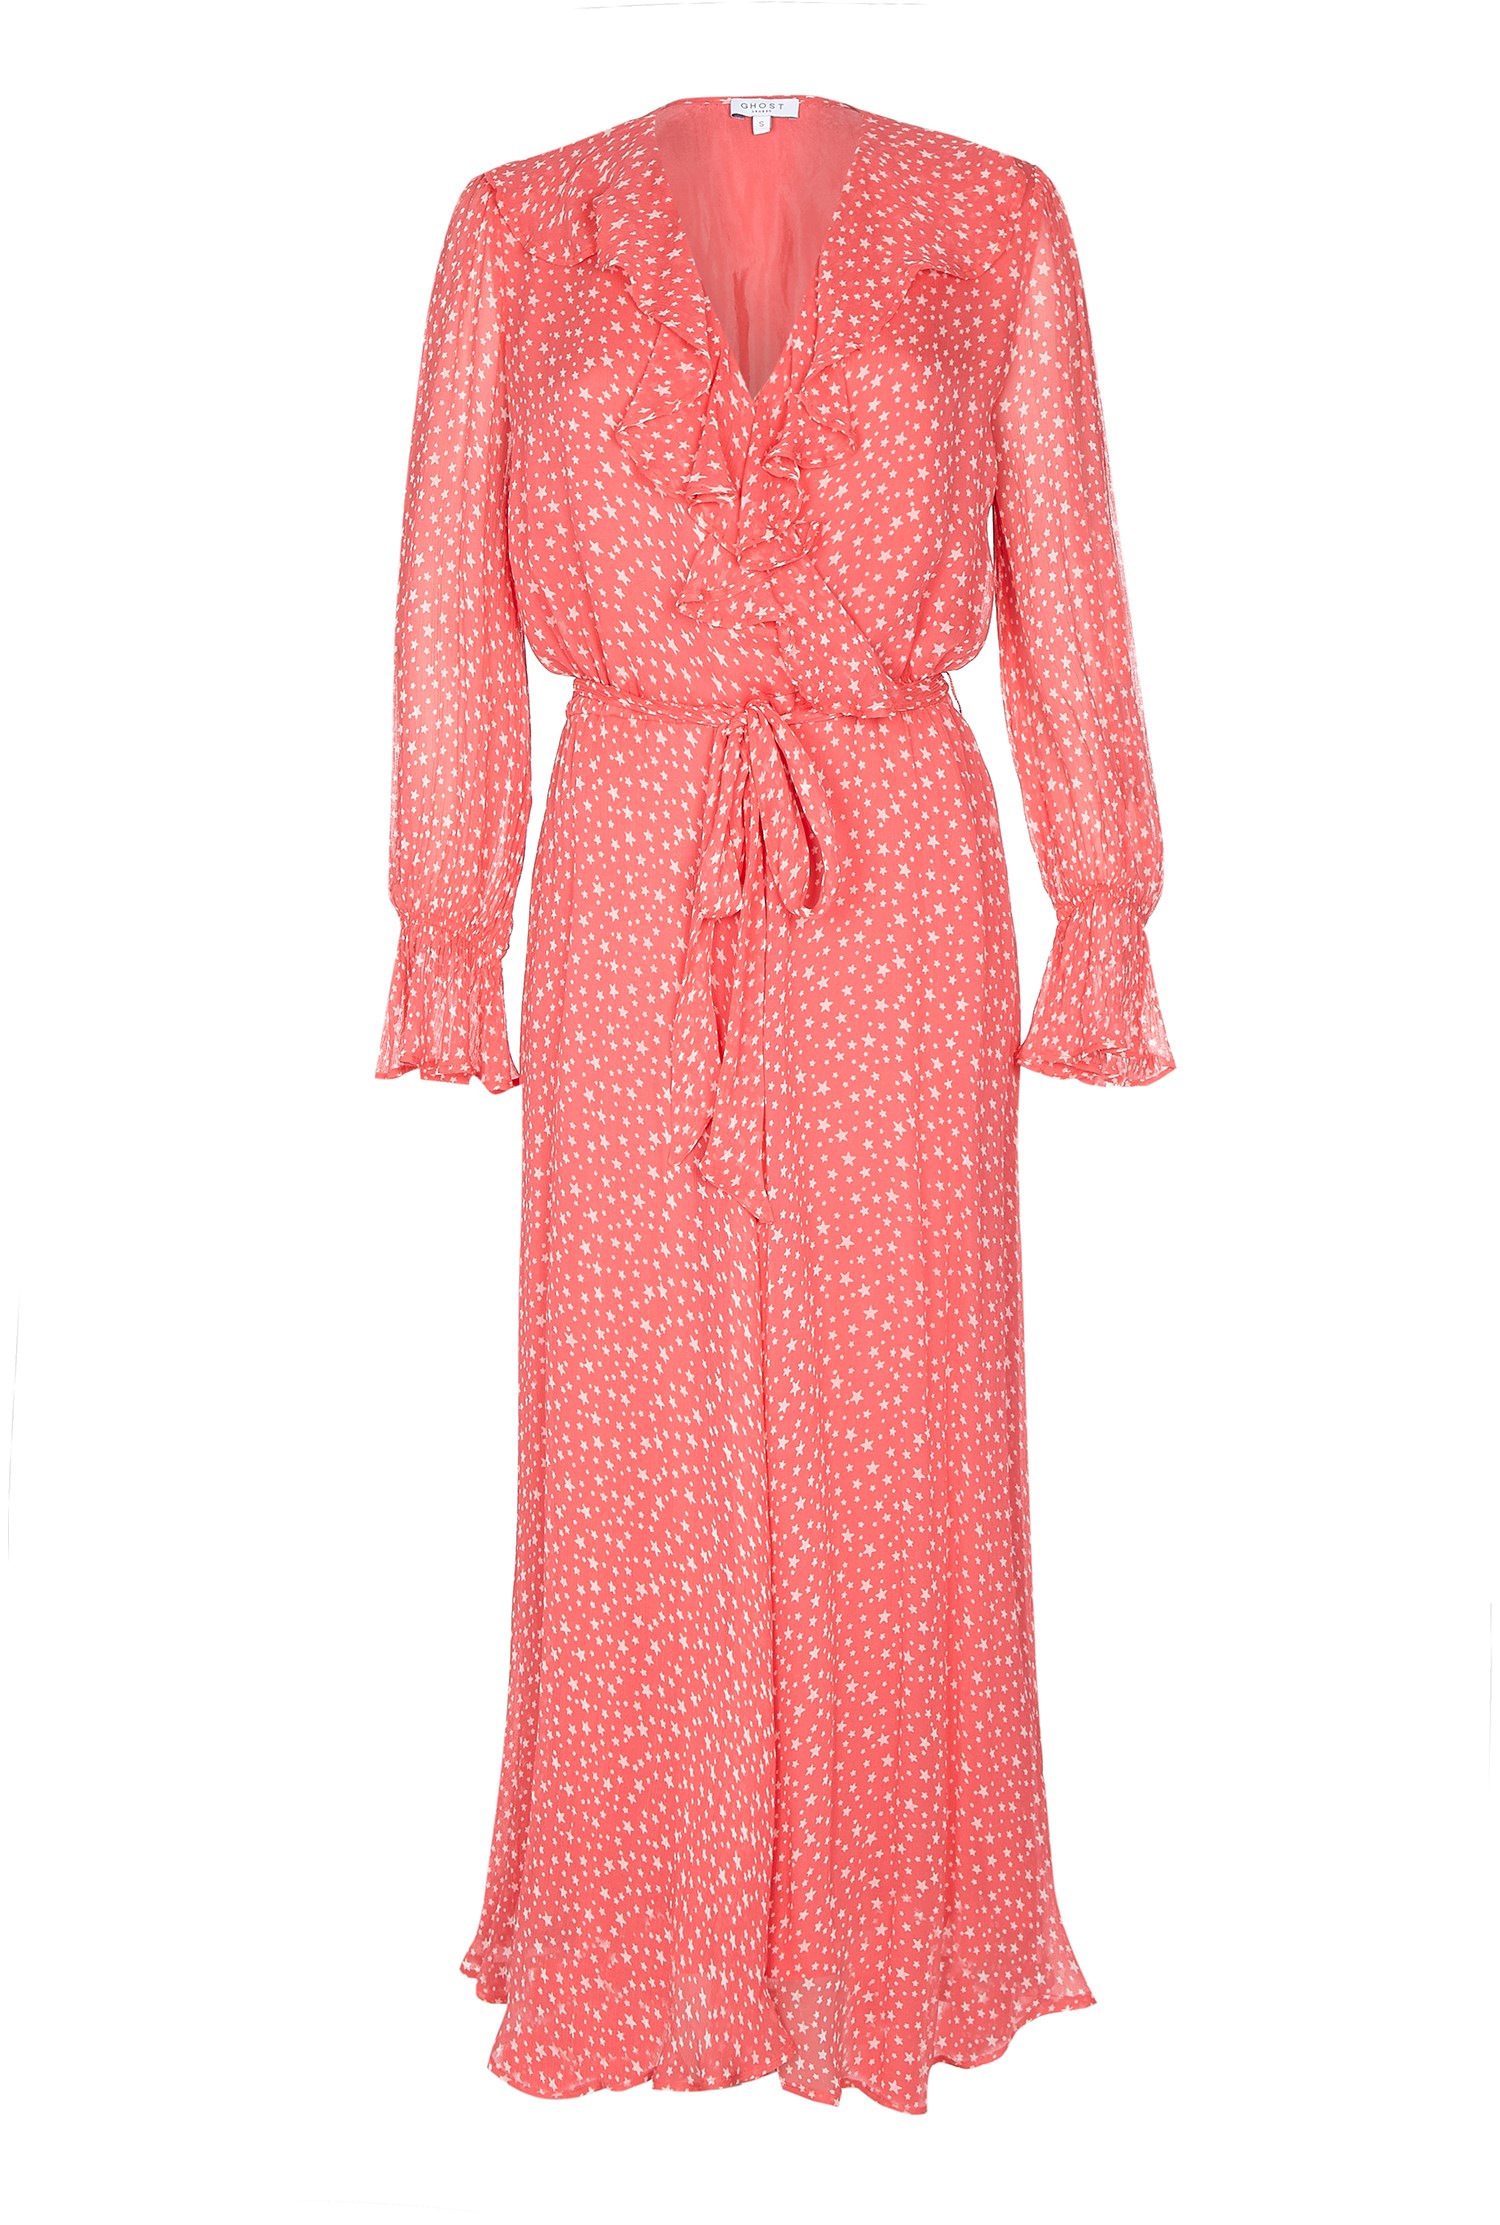 Su Ankle Length Coral Dress | Ghost London